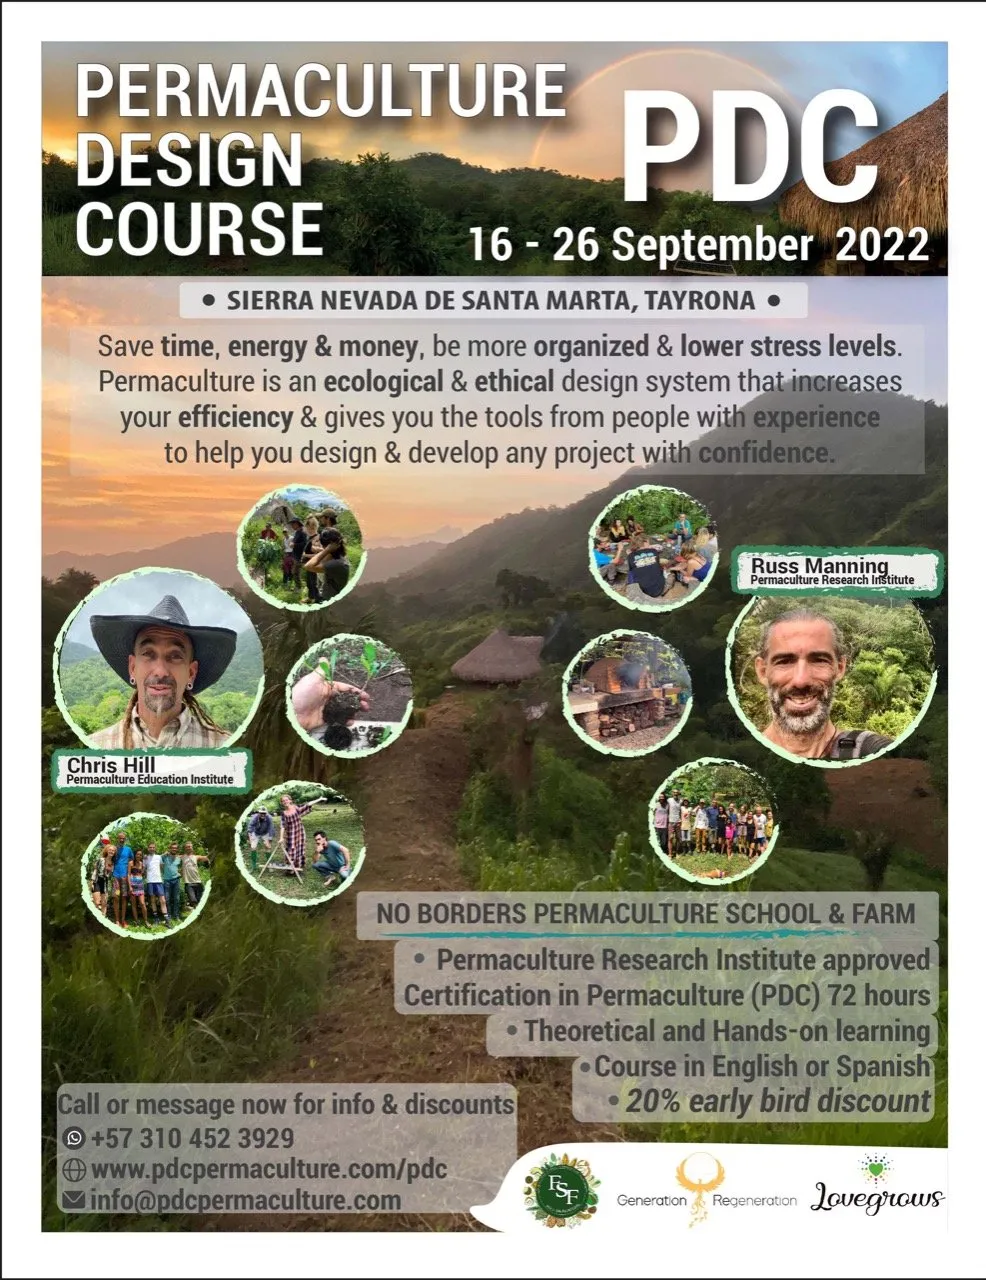 PDC permaculture design course colombia